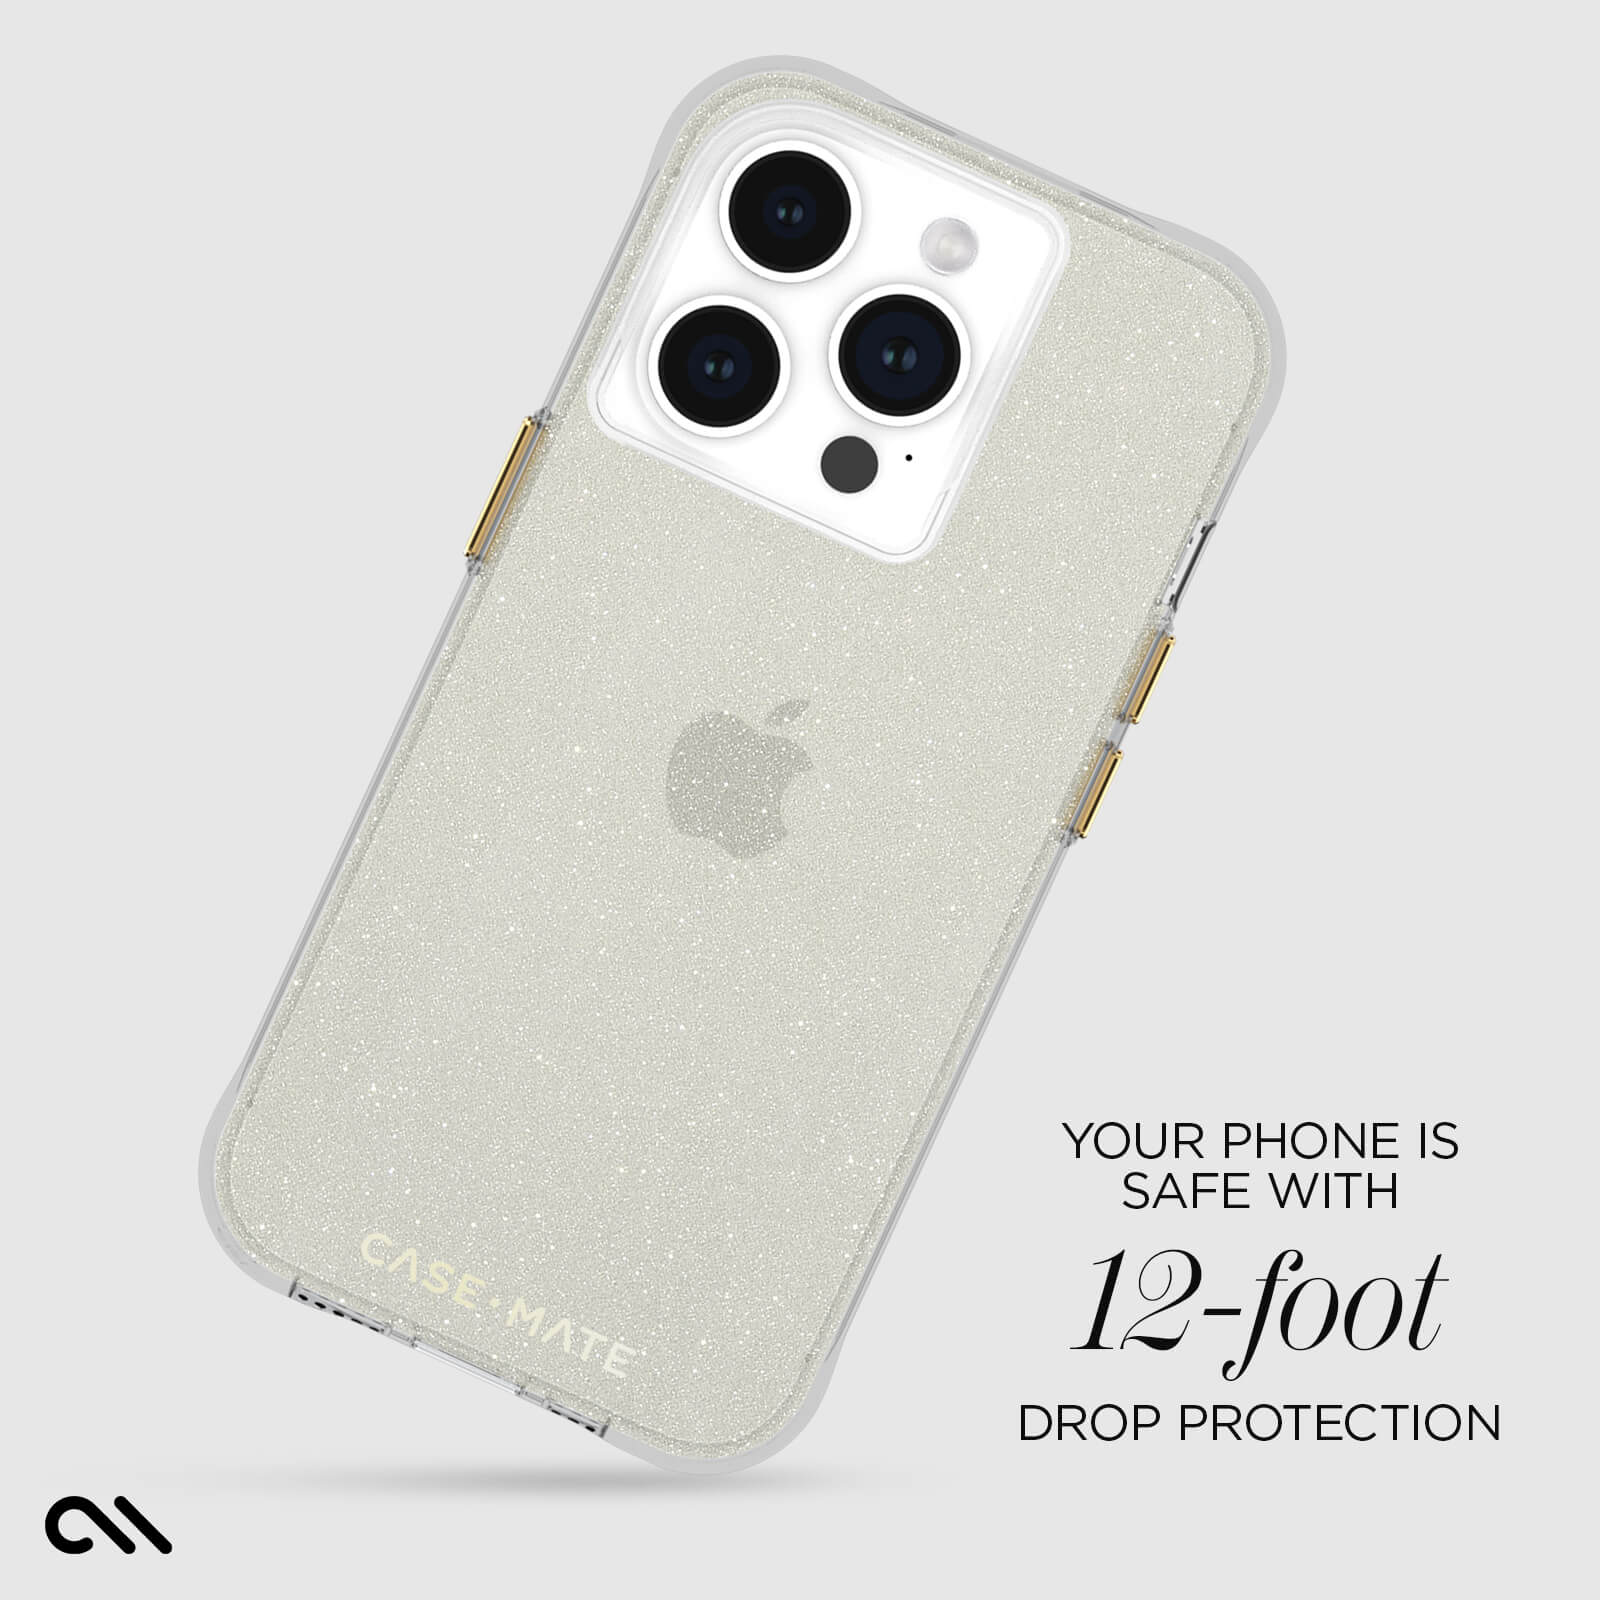 YOUR PHONE IS SAFE WITH 12-FOOT DROP PROTECTON